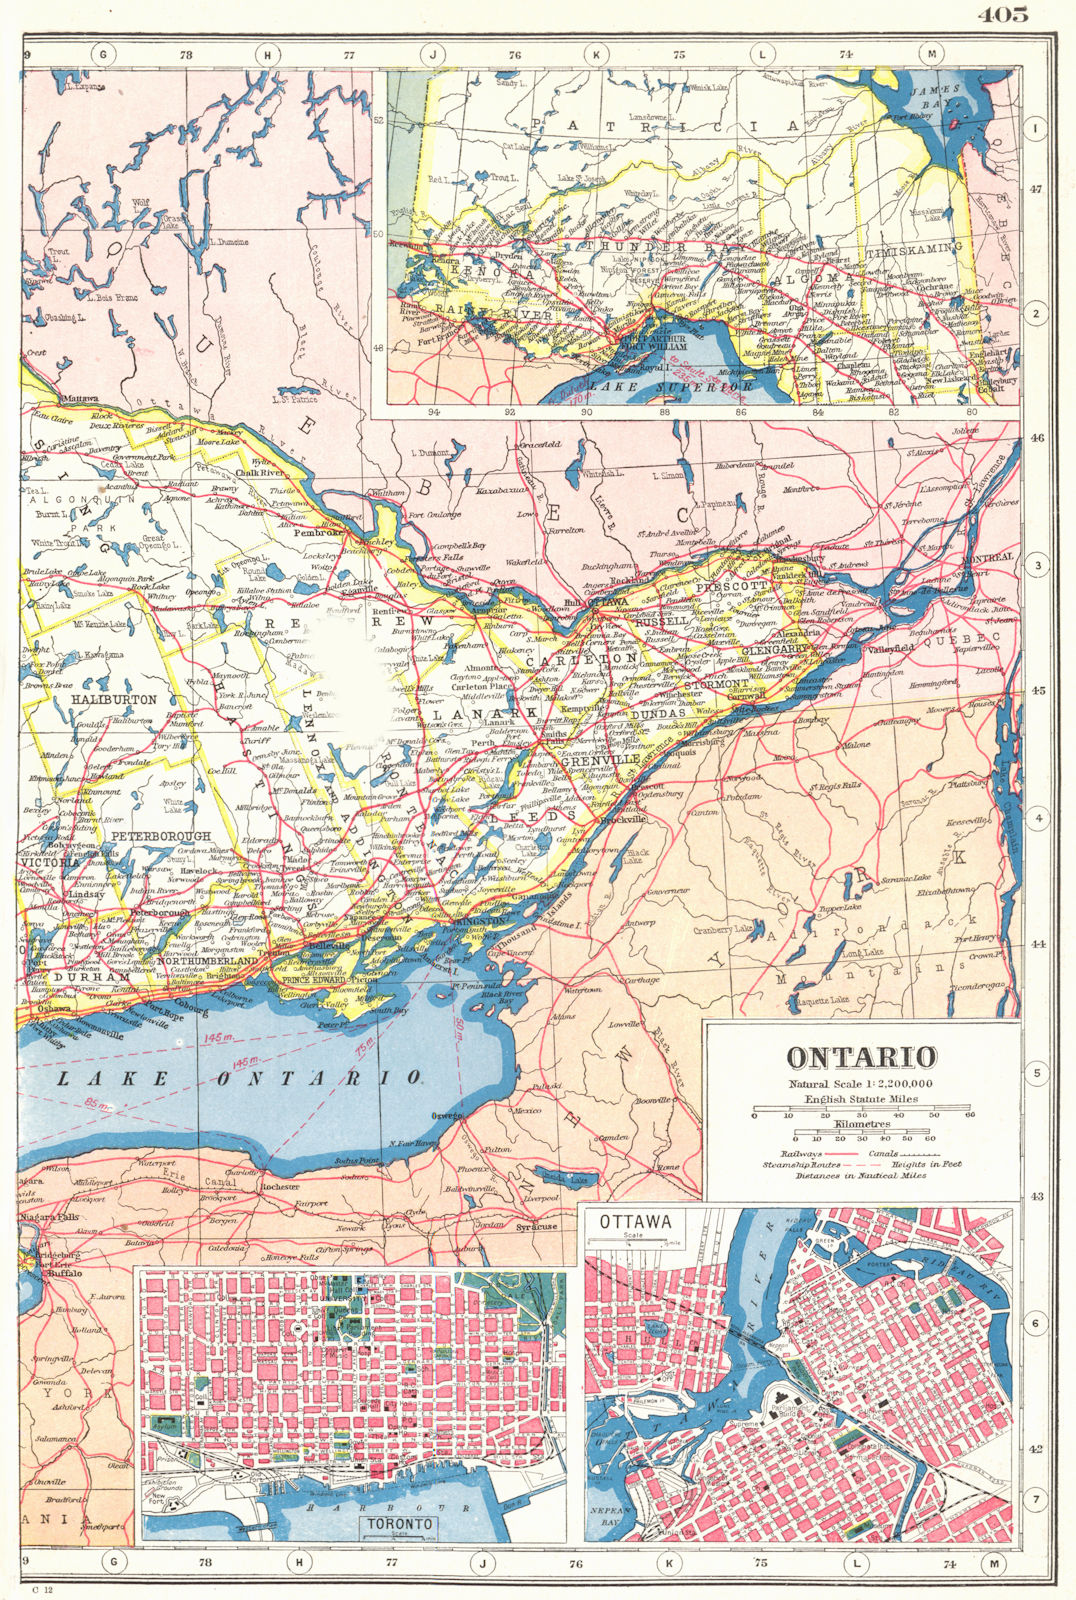 ONTARIO EAST. Inset plans of Toronto, Ottawa. HARMSWORTH 1920 old antique map